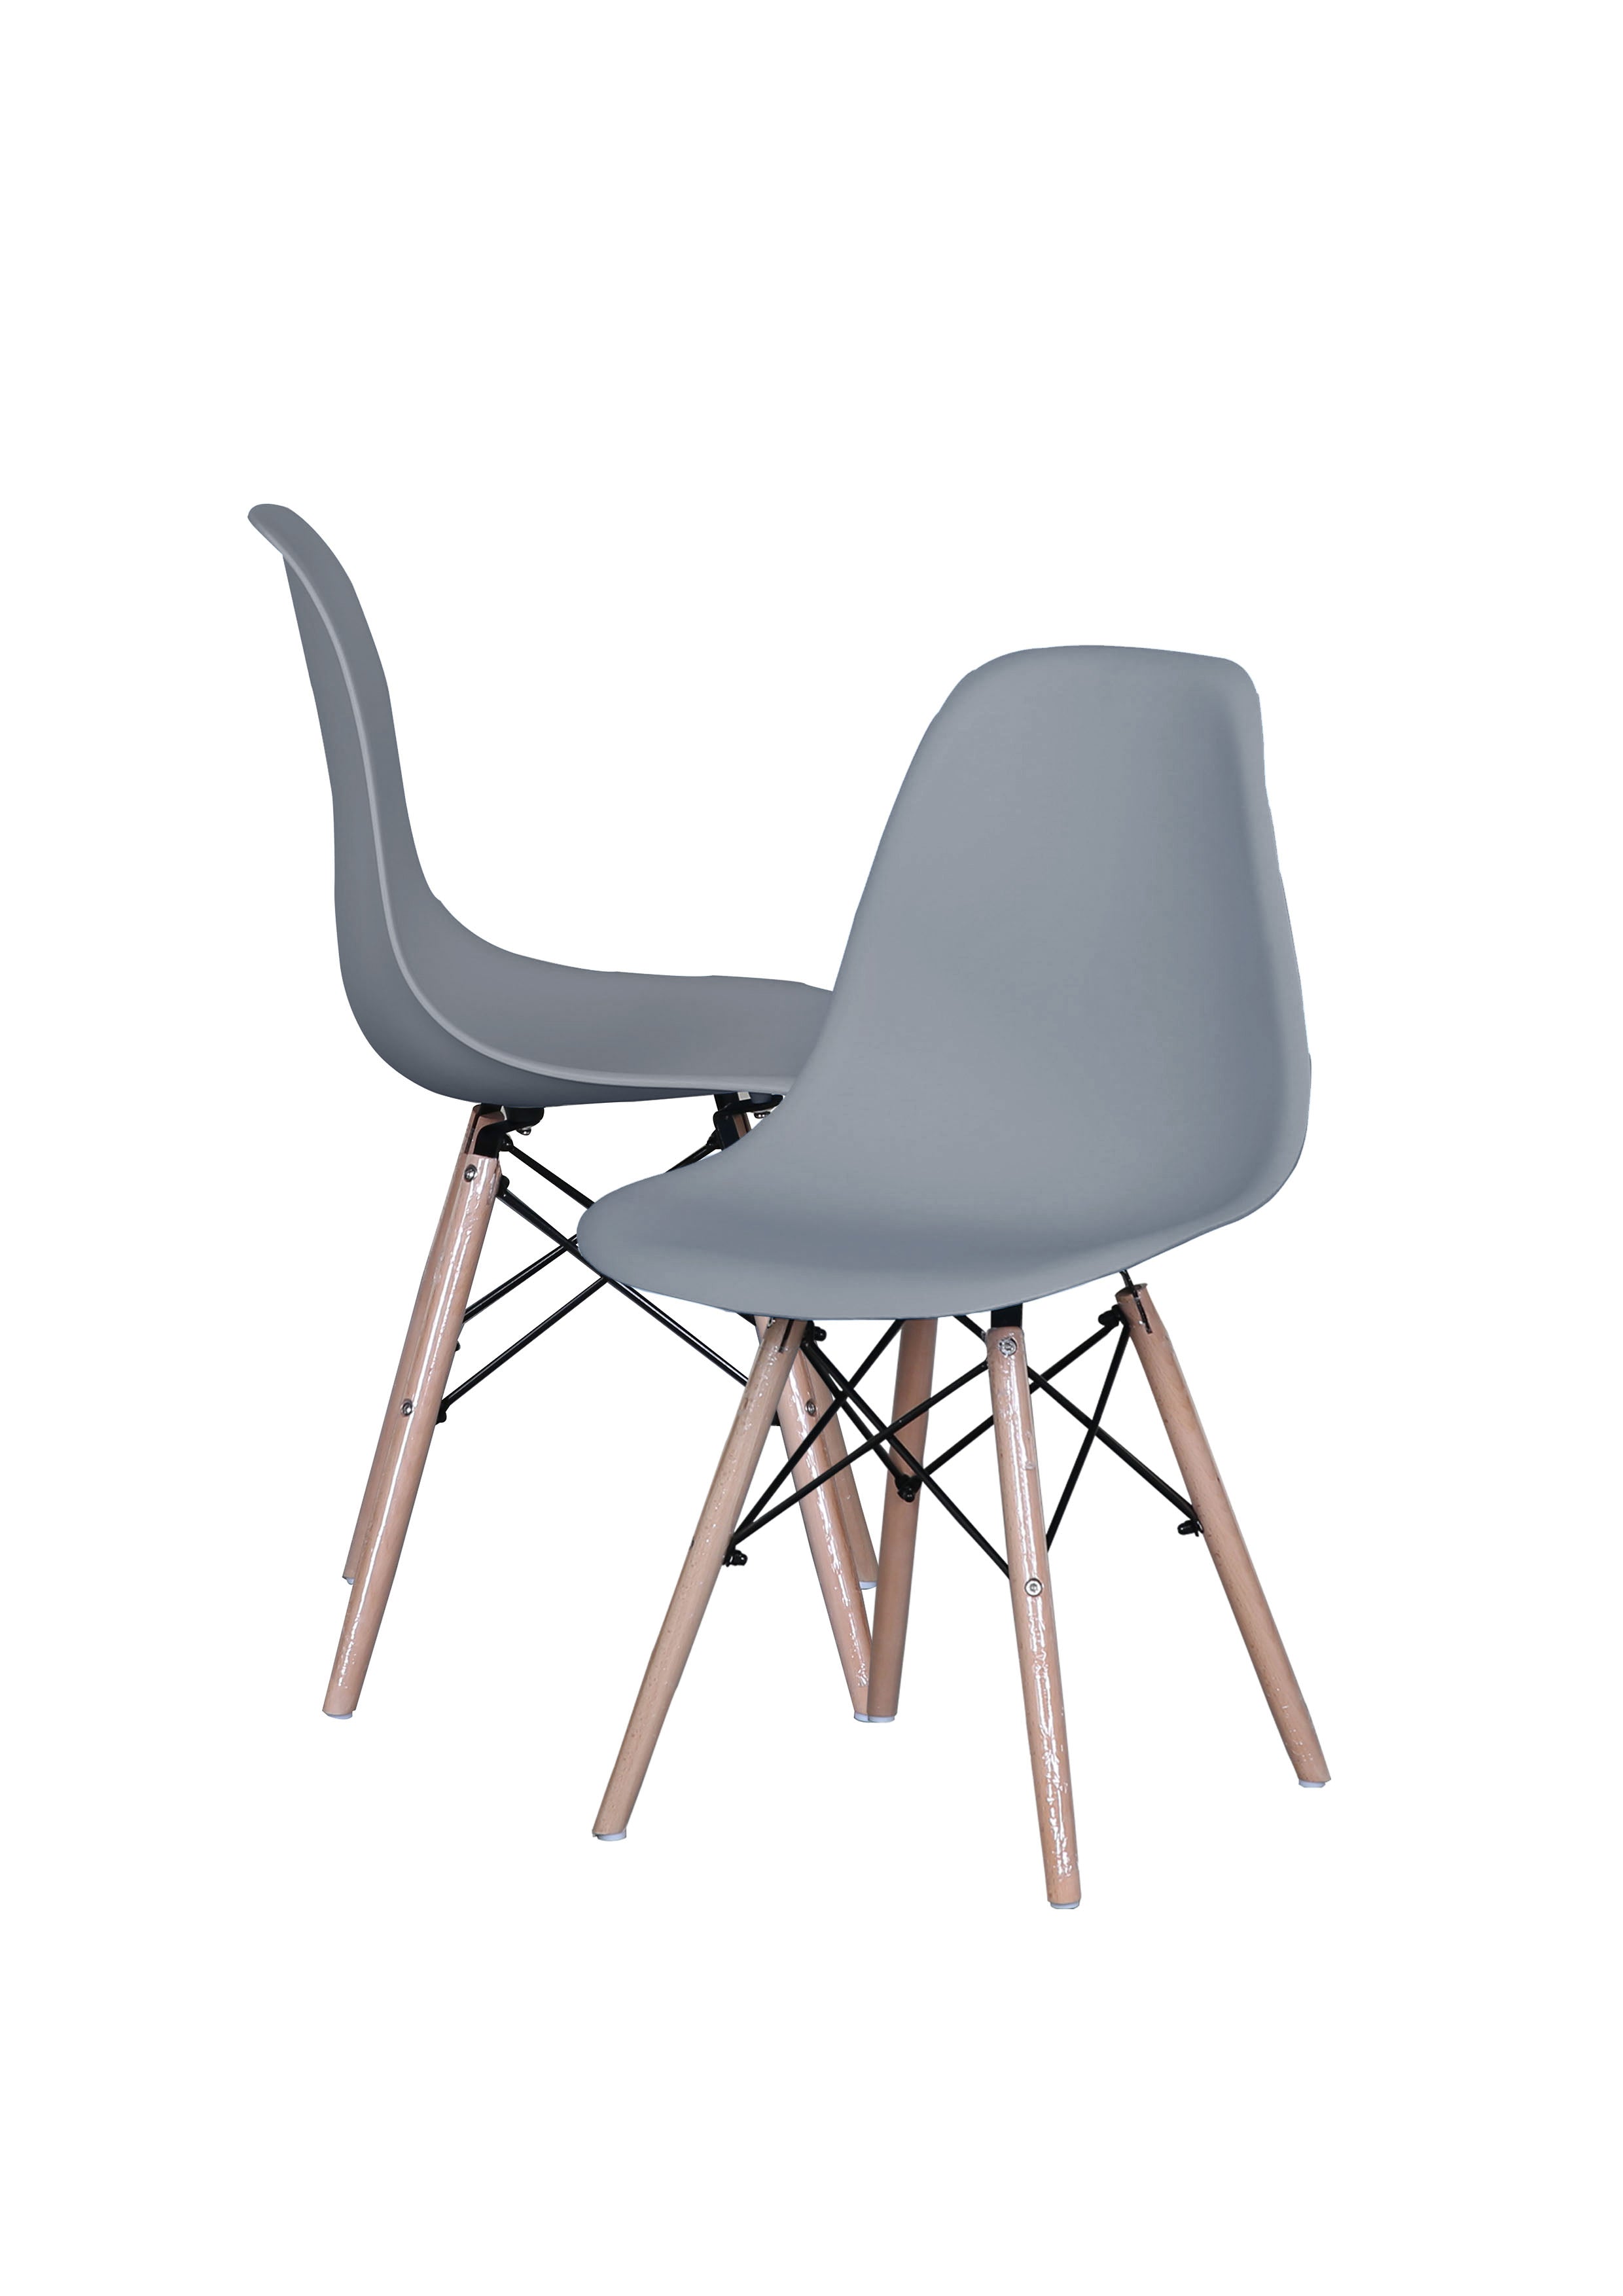 Ray Set of (2) Classic Modern Eames-Inspired Chairs